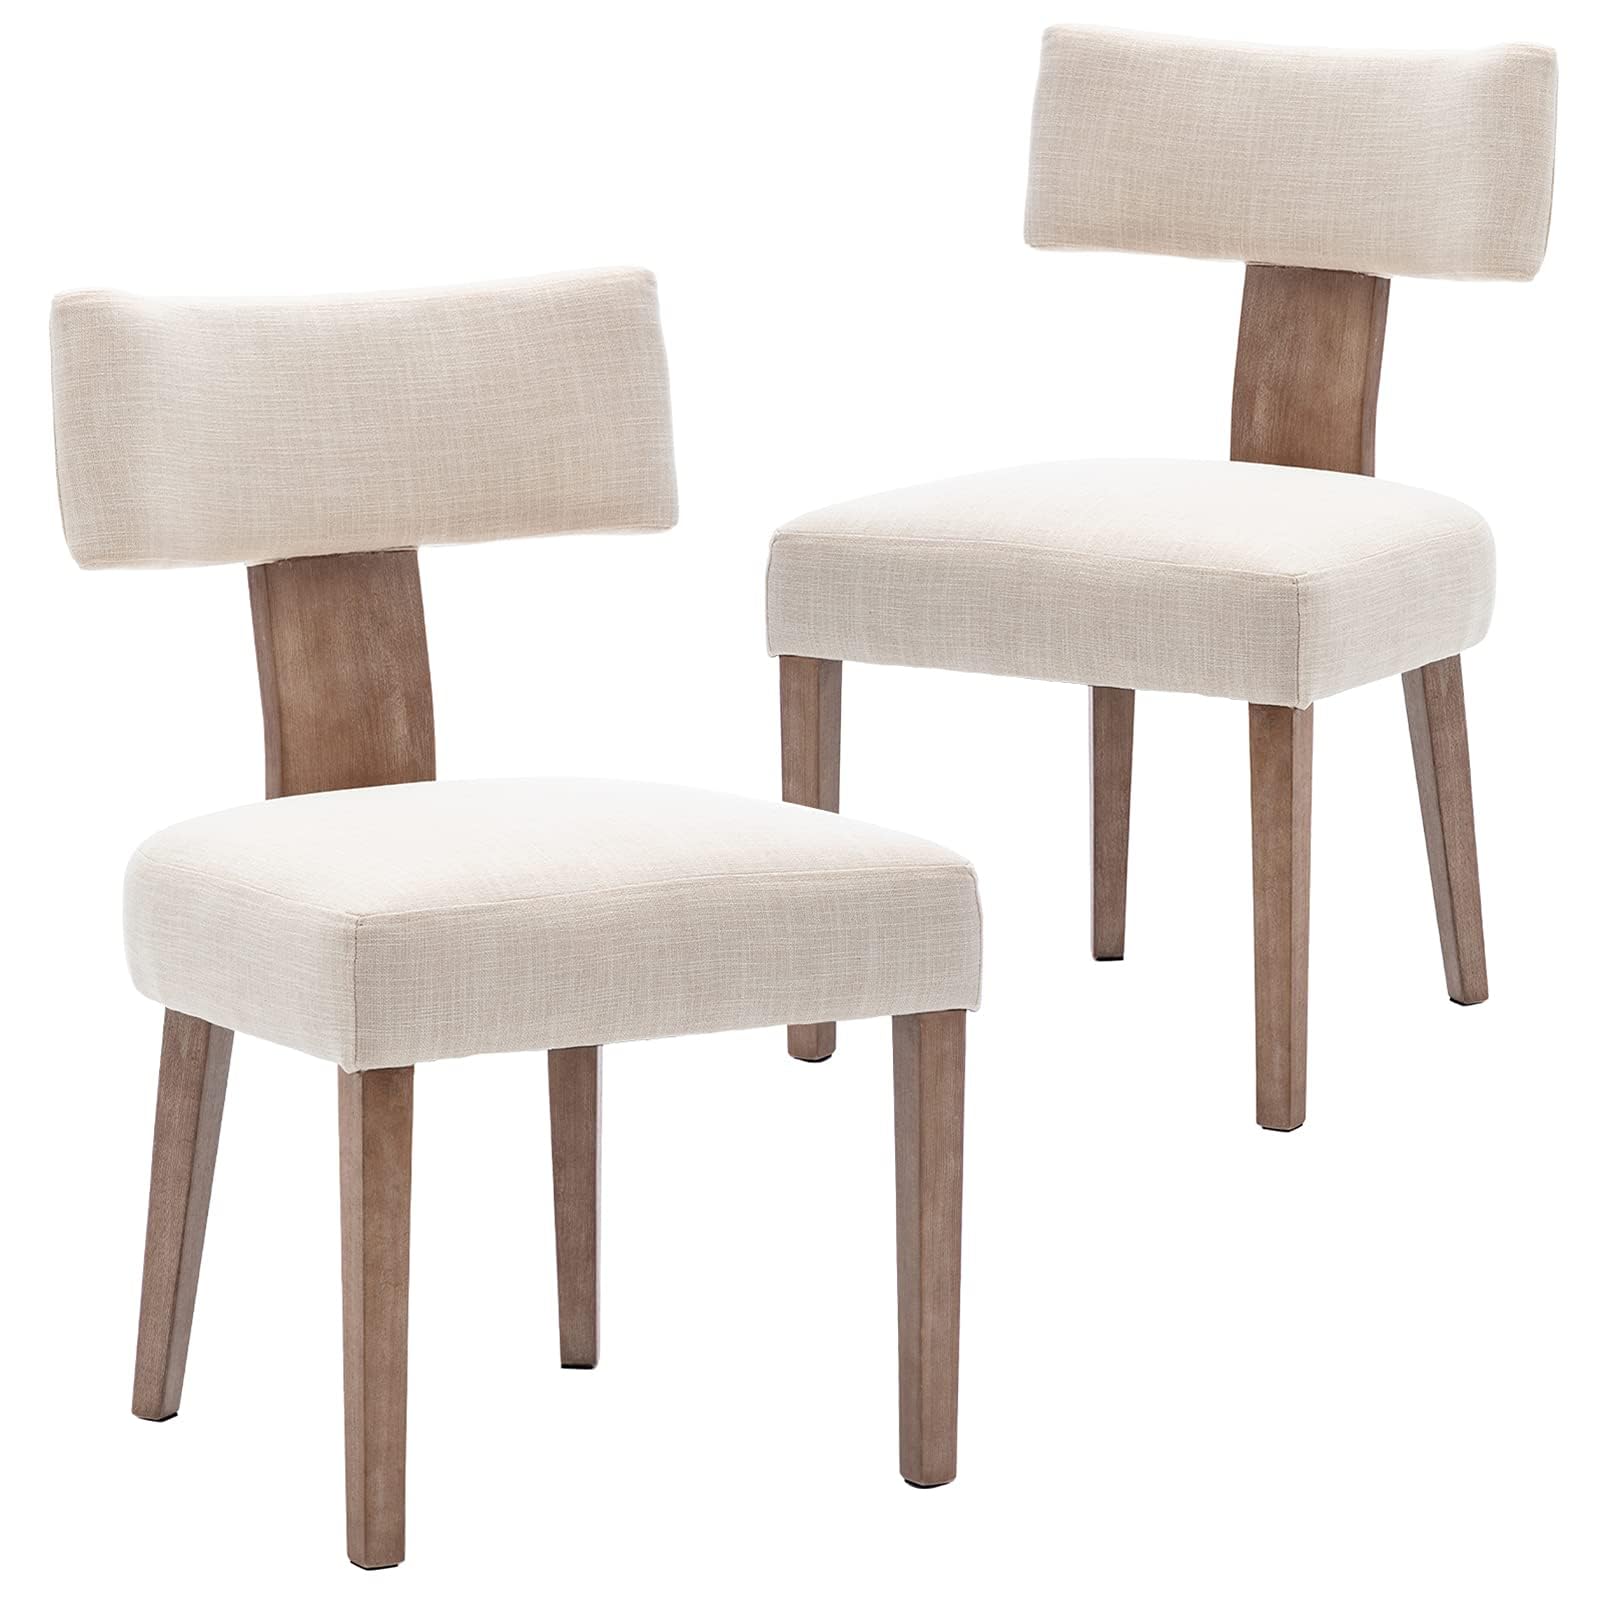 The Best Modern Dining Chairs for Contemporary Spaces插图4